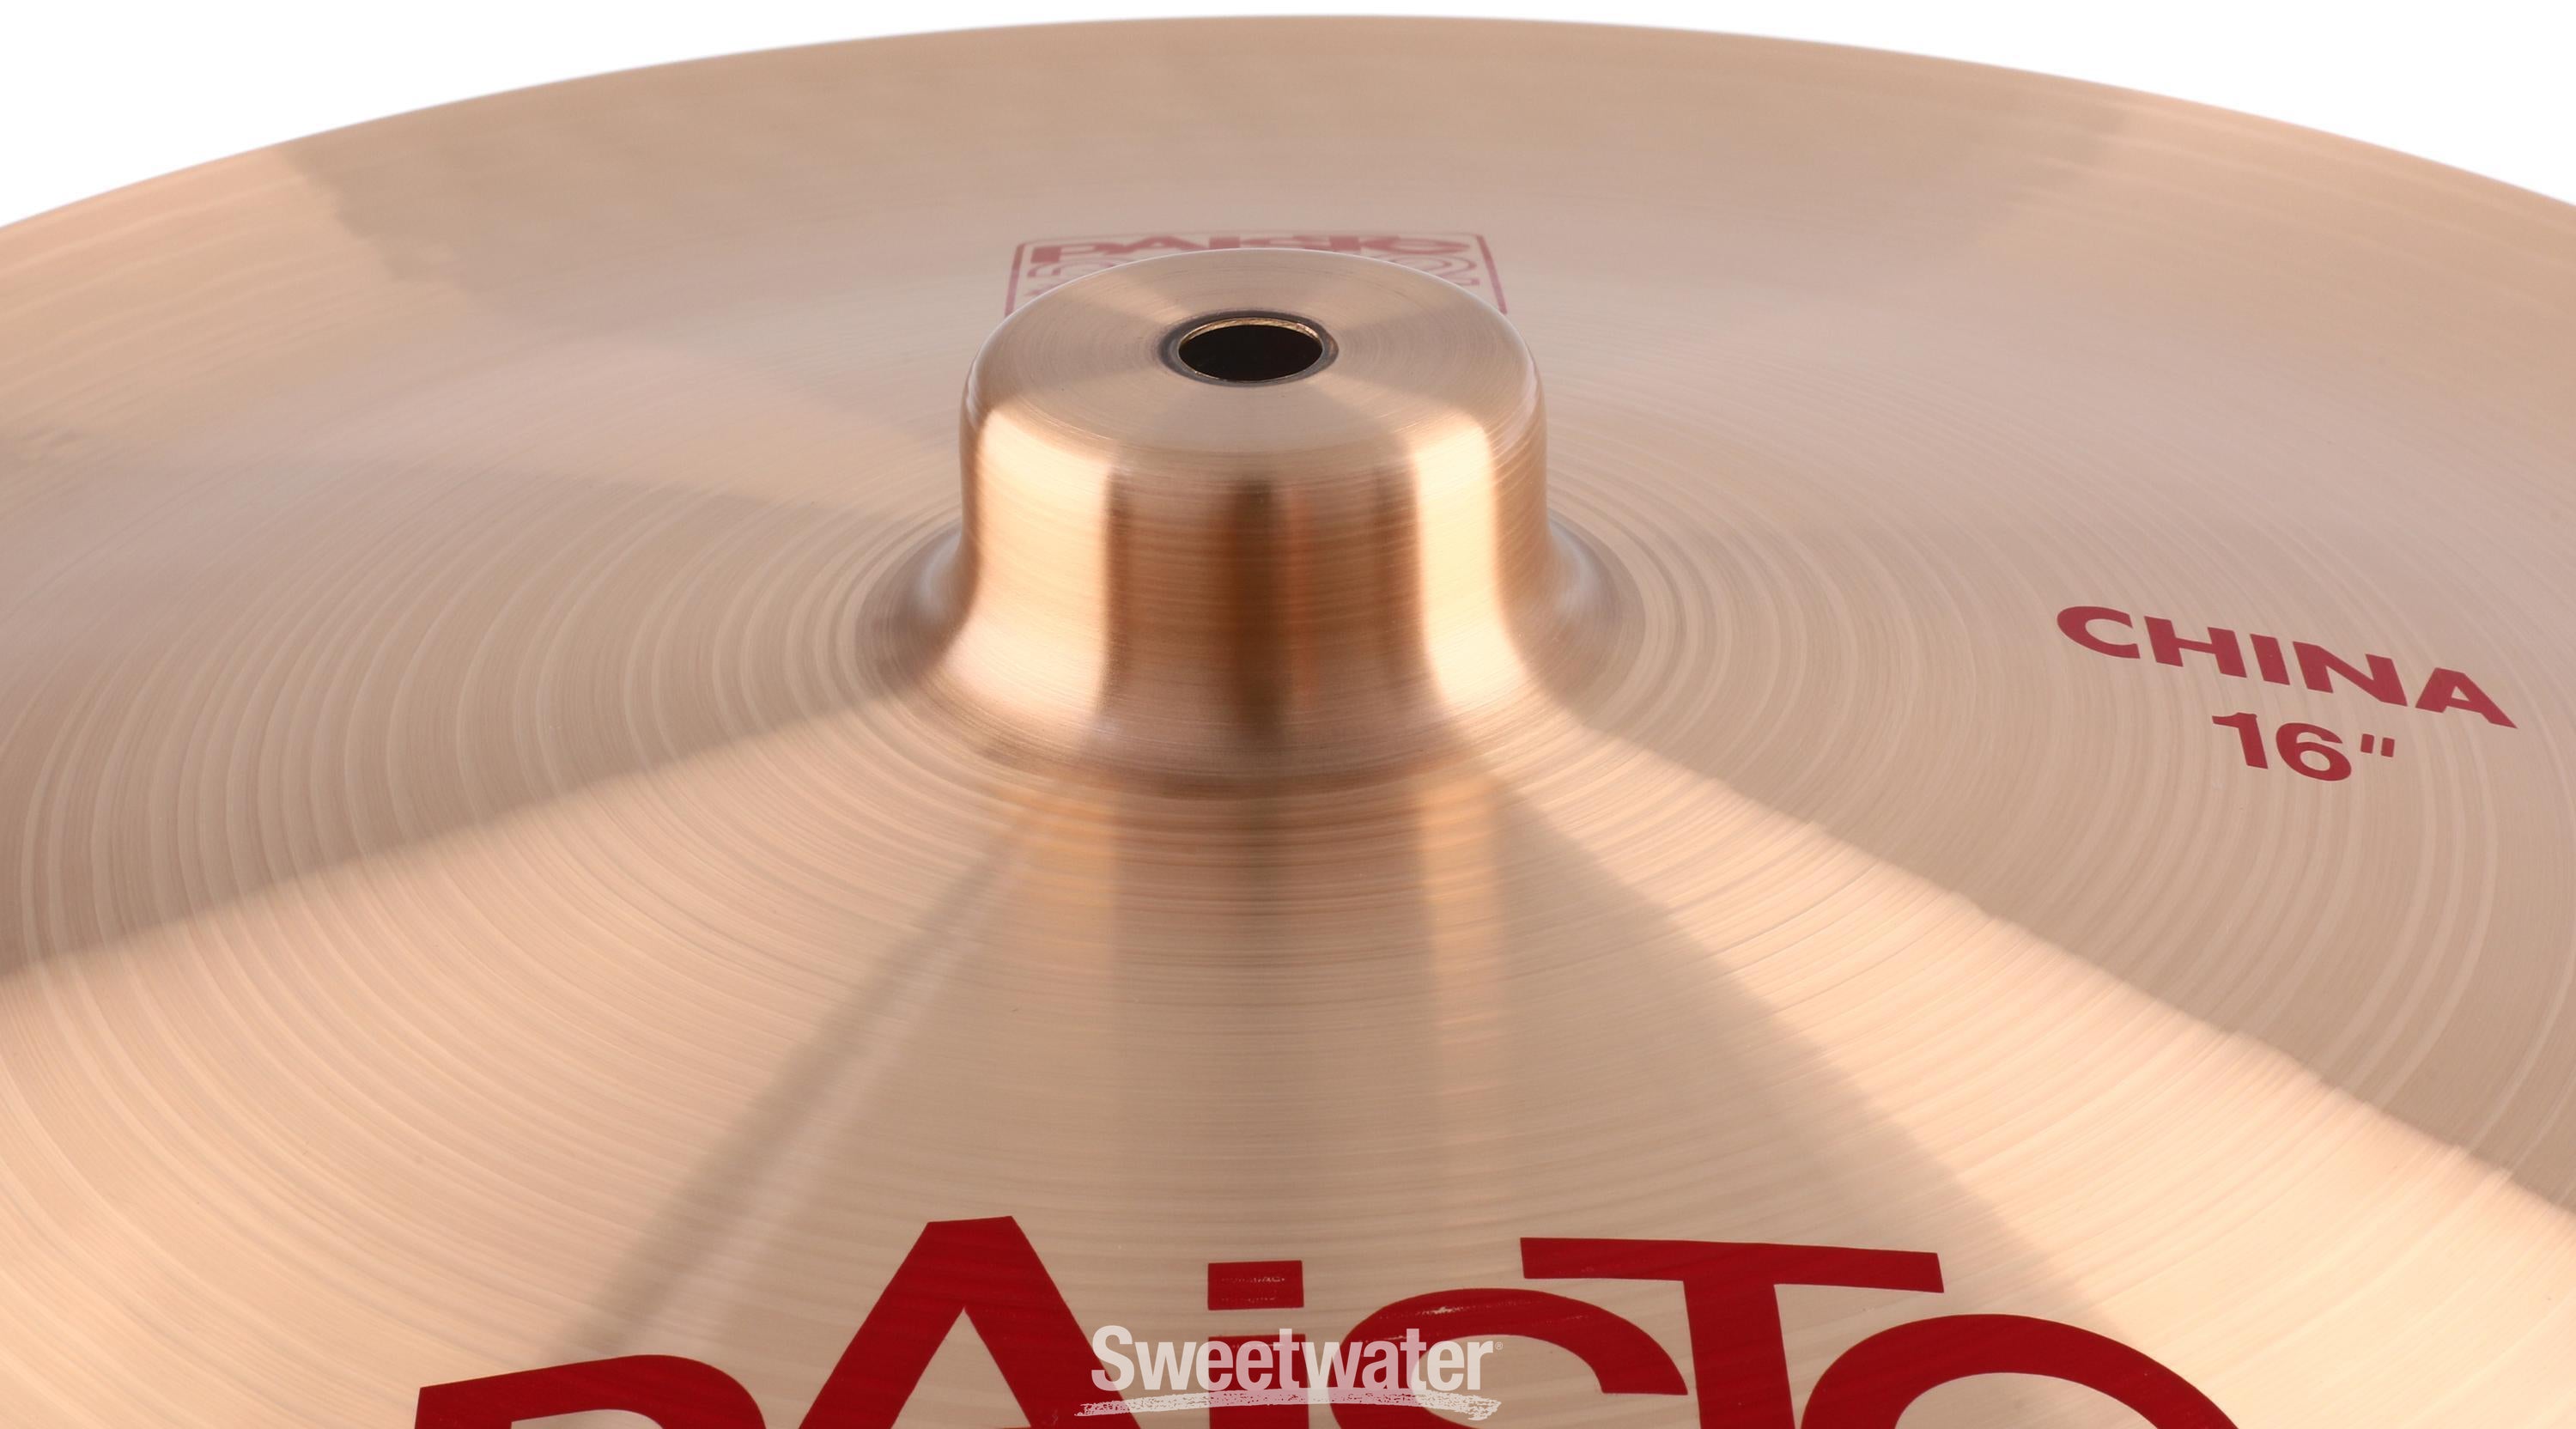 Paiste 16 inch 2002 China Type Cymbal | Sweetwater